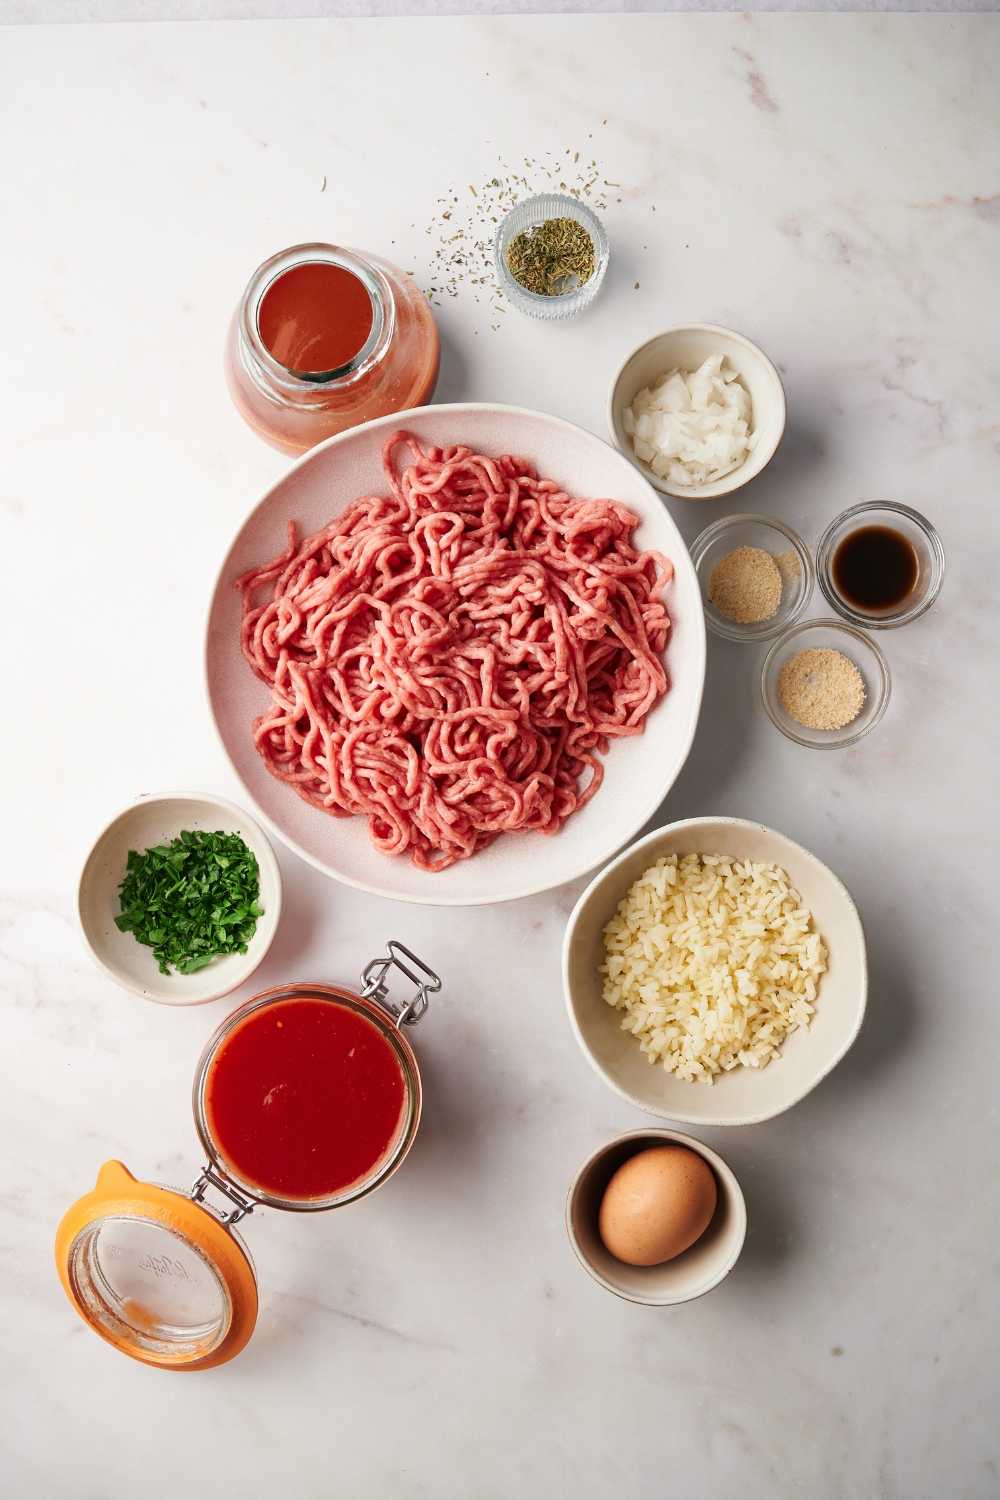 ground beef, rice, tomato sauce, parsley, an egg, and spices in separate bowls on a white counter